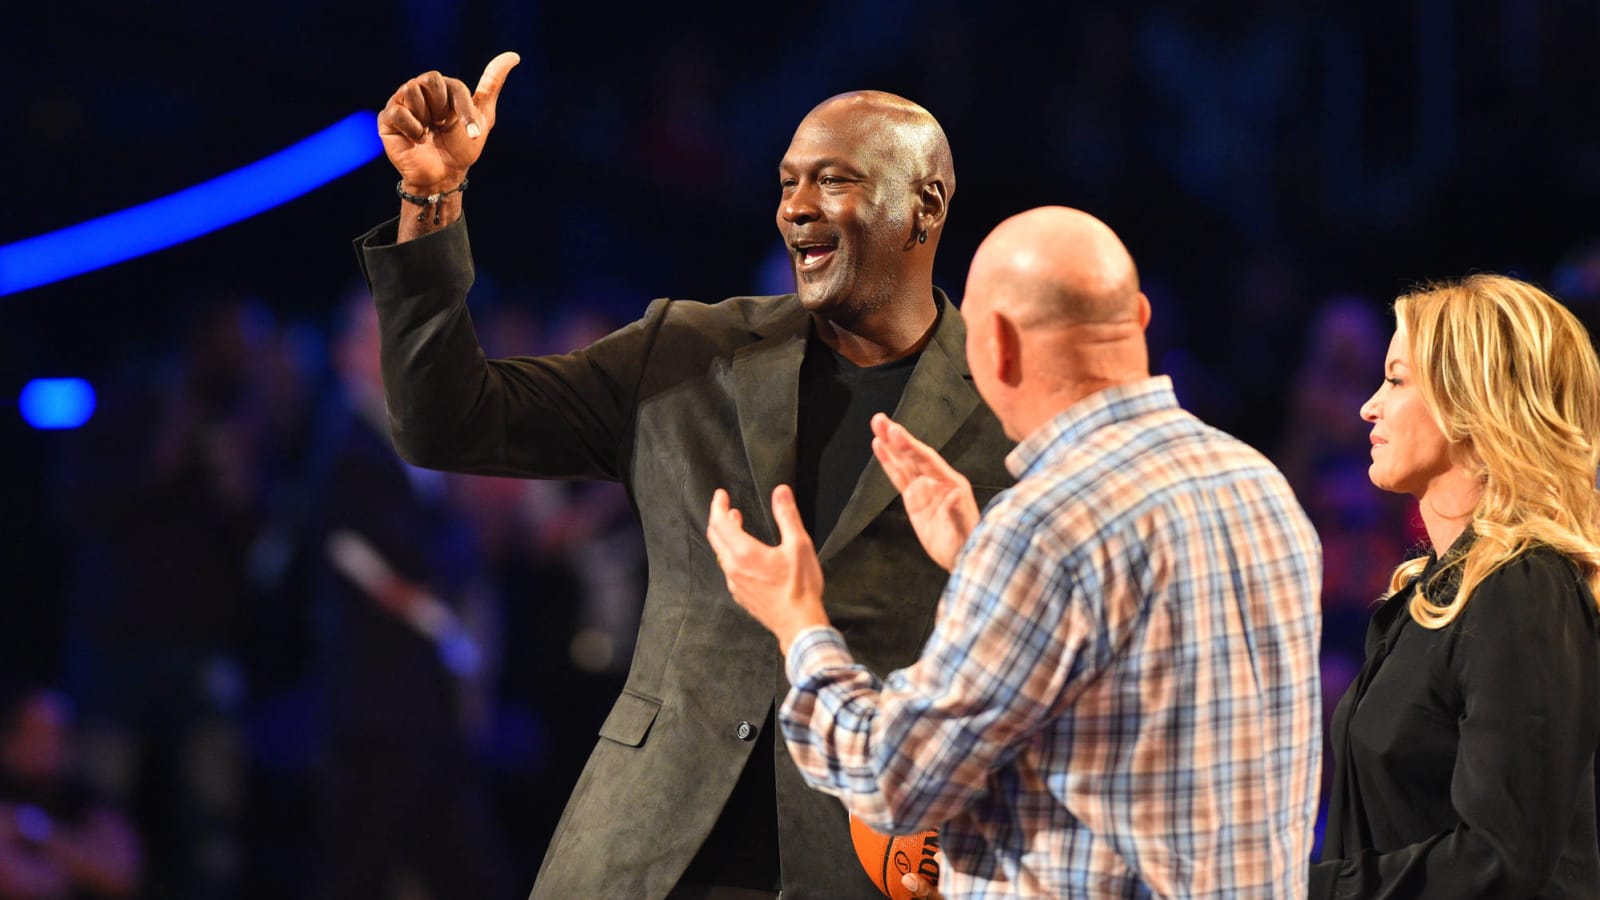 Michael Jordan's daughter used Google to find out why her dad was so famous